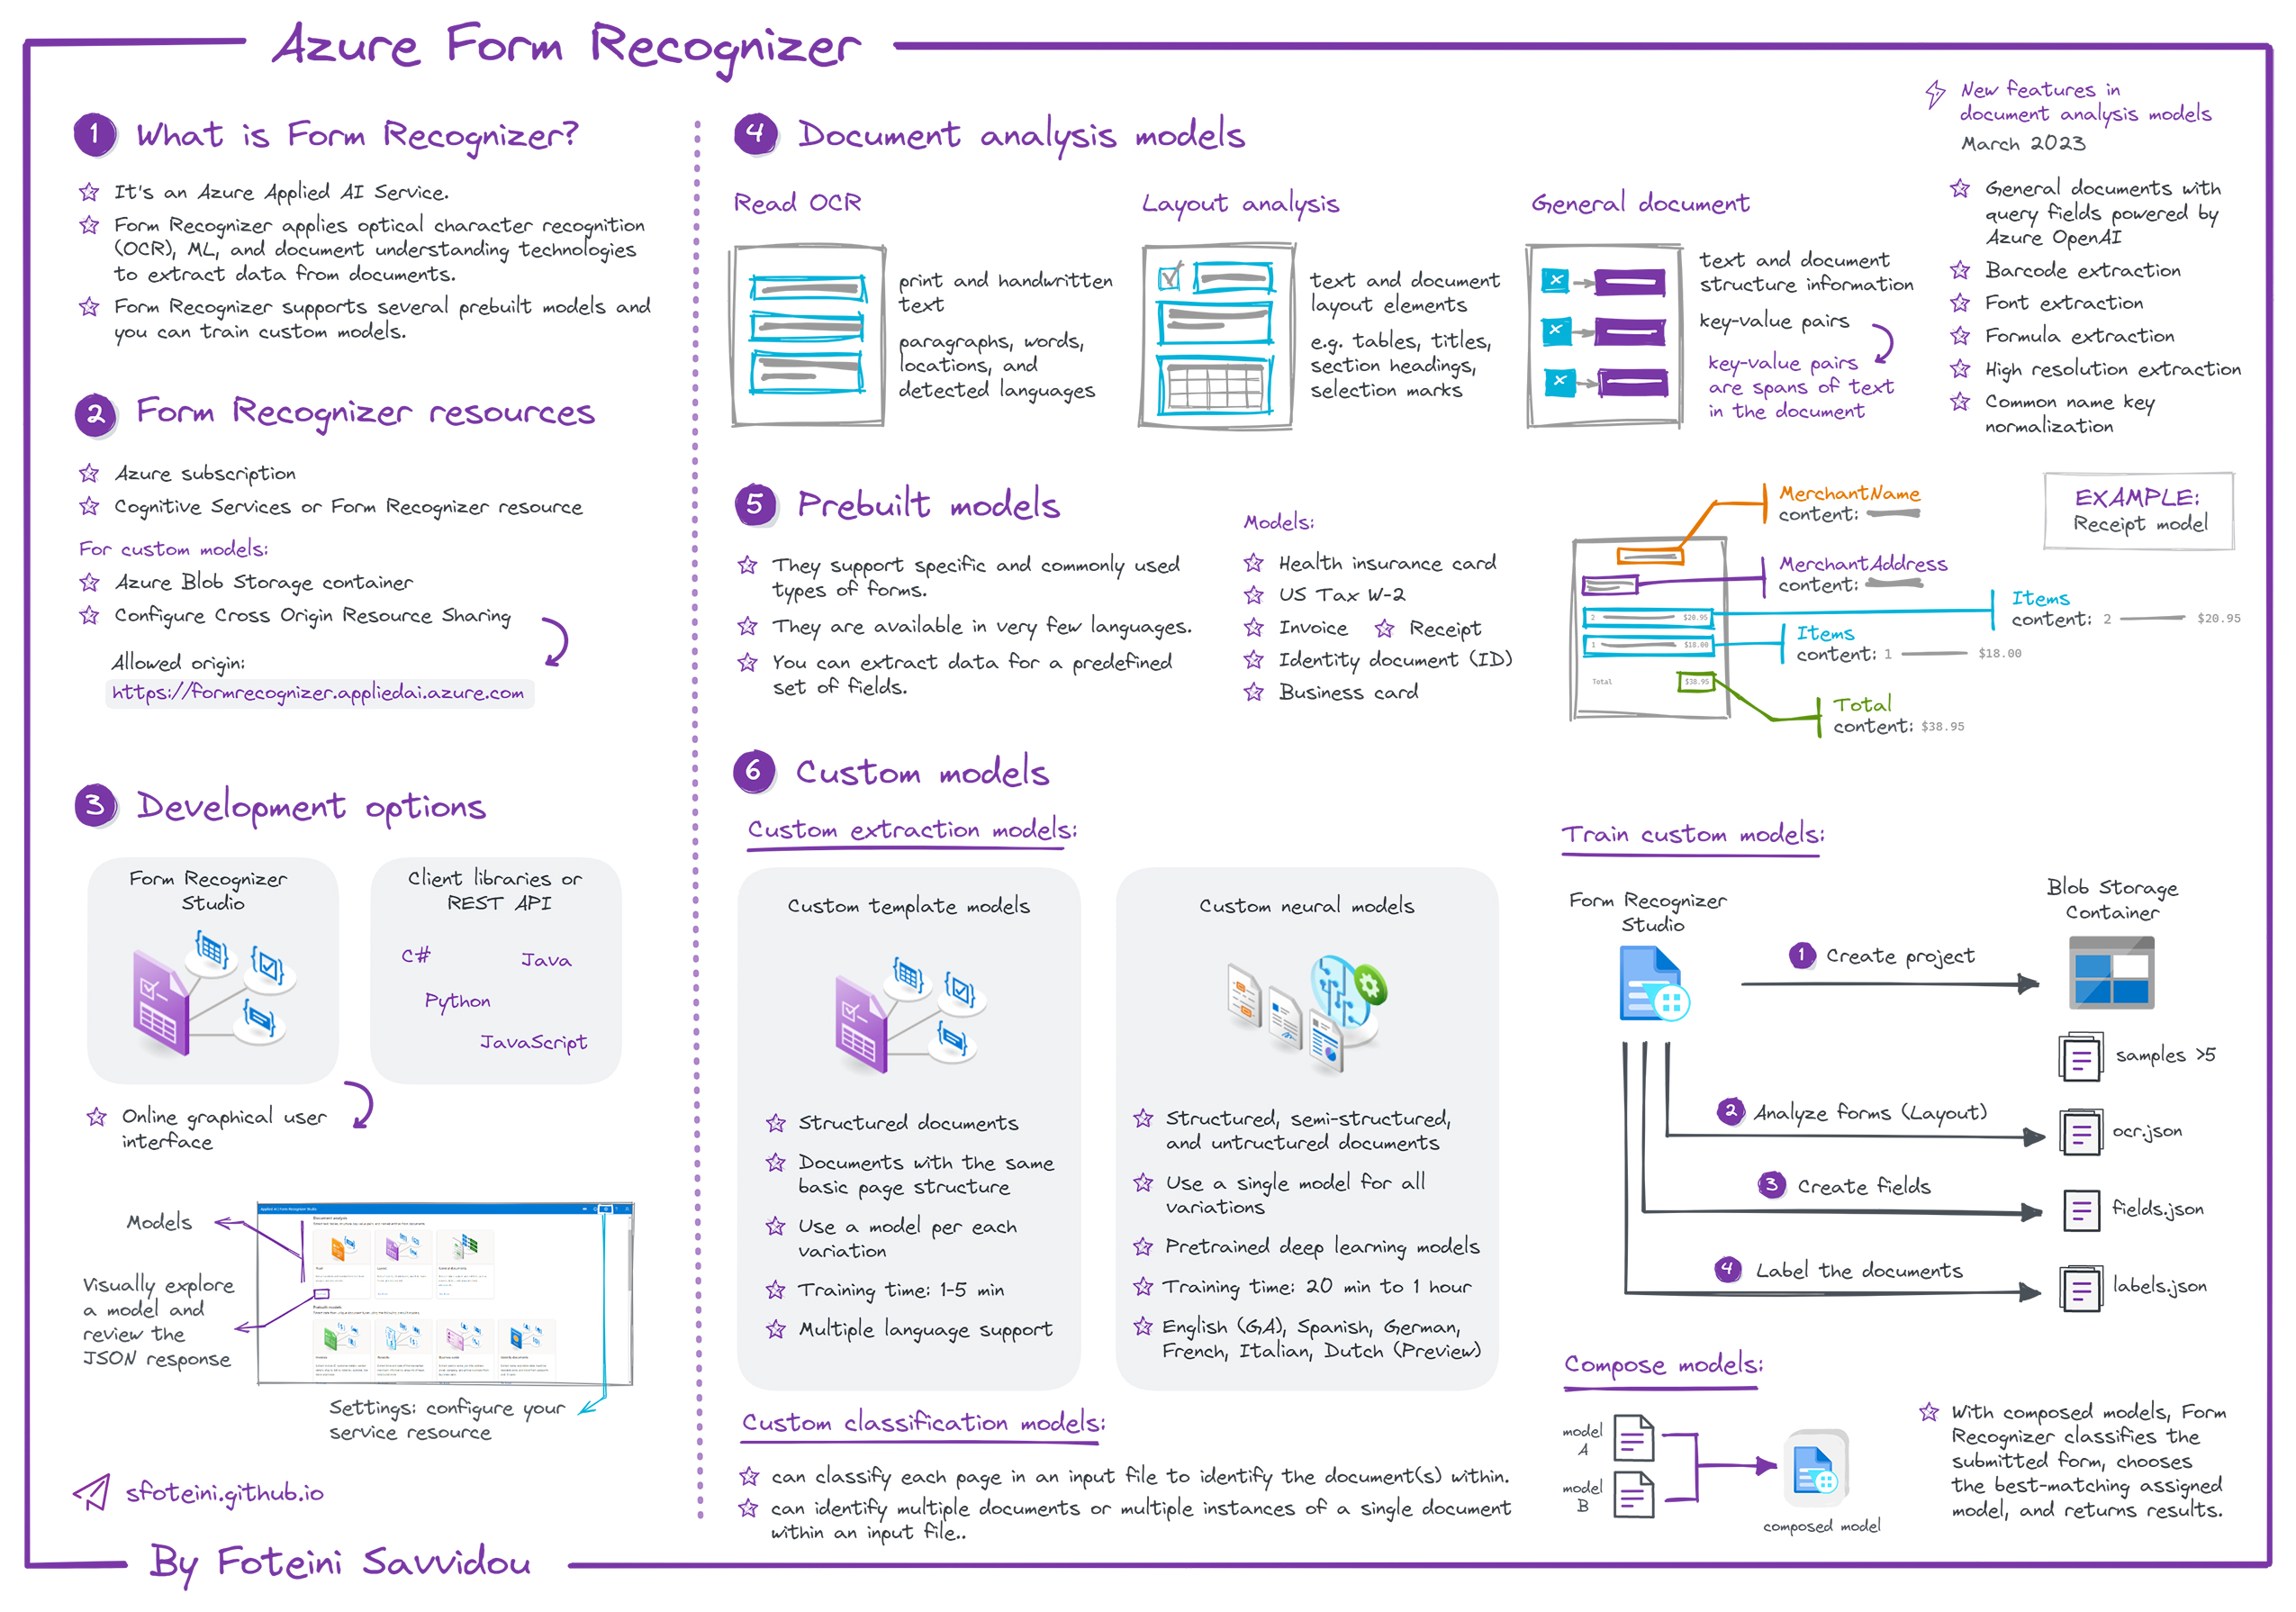 Overview of Azure Form Recognizer